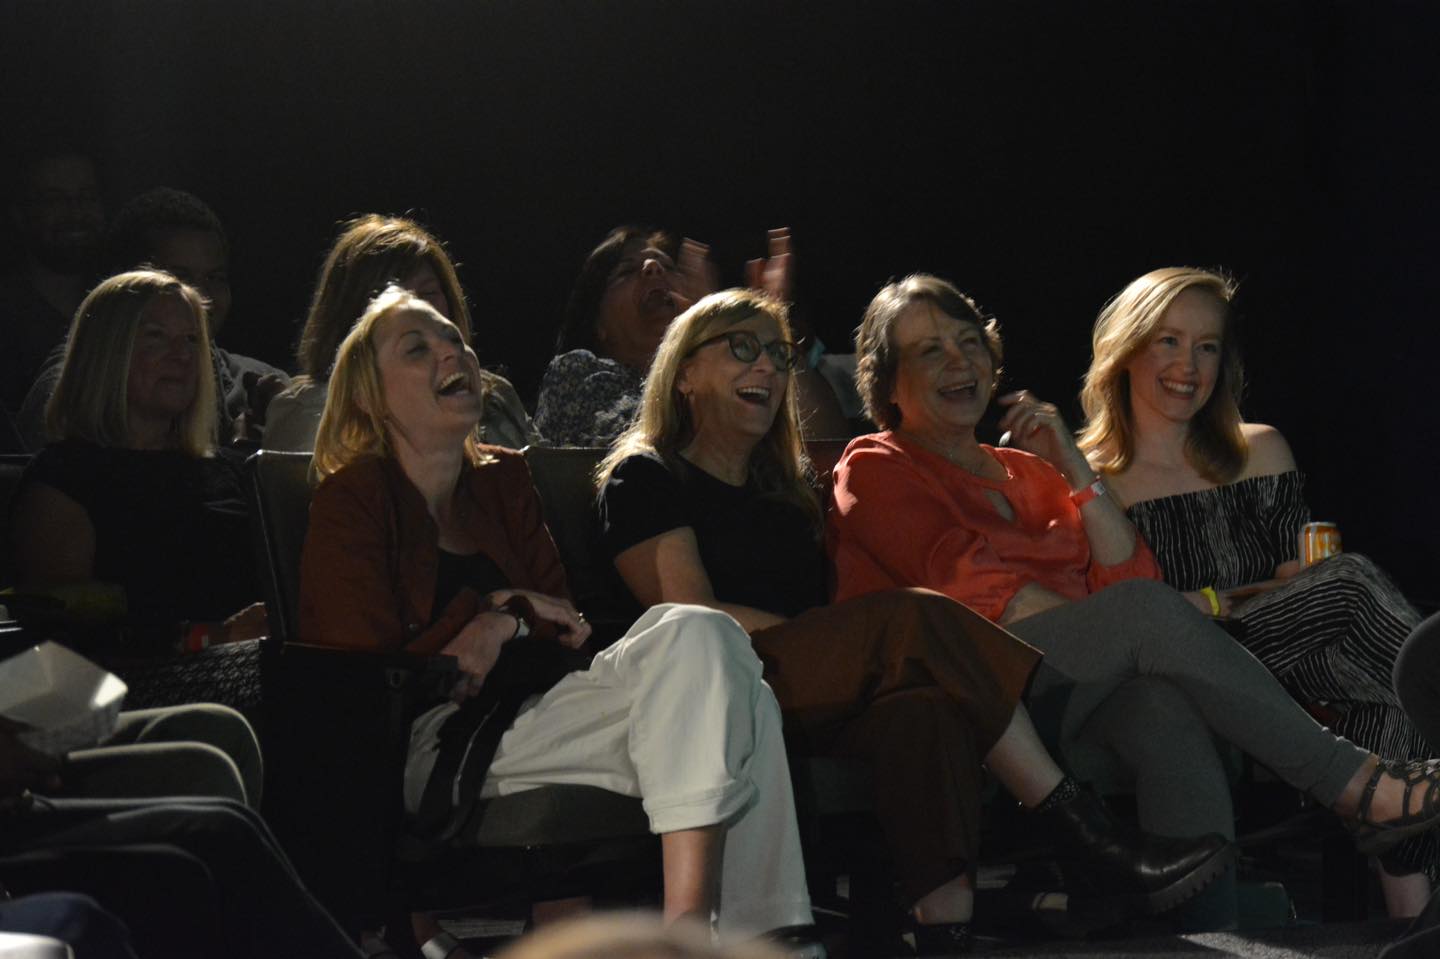 Women watching a comedy show and laughing. They are enjoying the show.